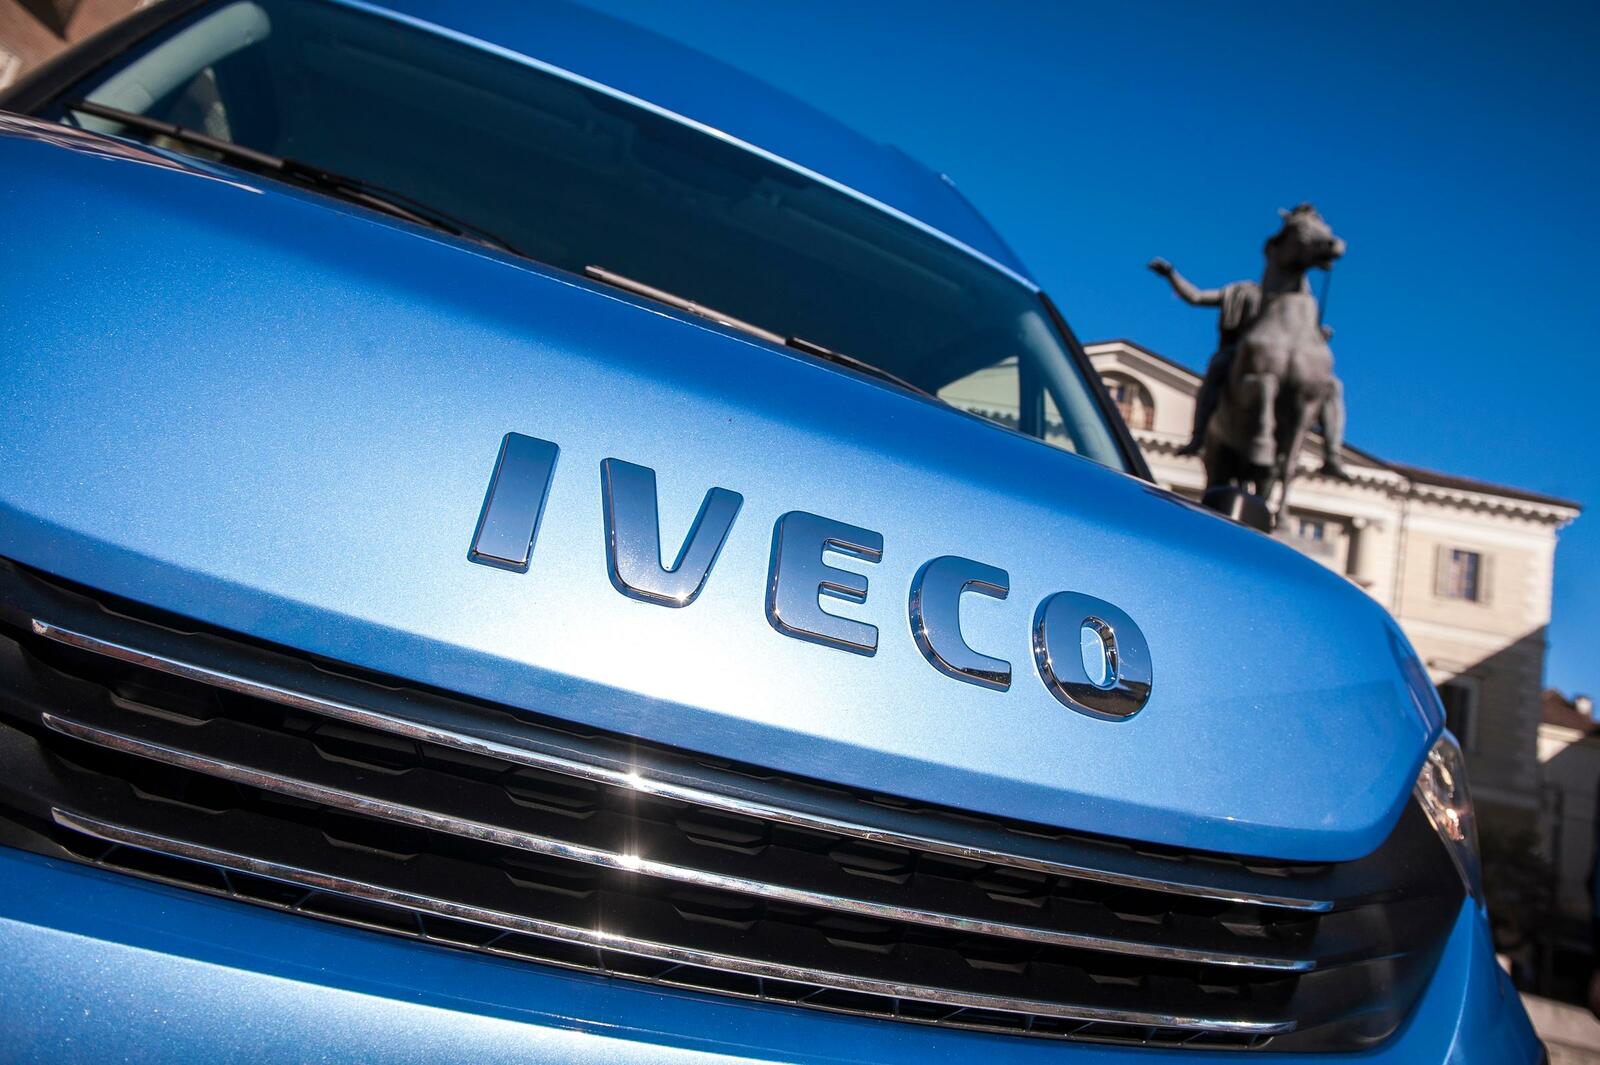 iveco-daily.jpeg